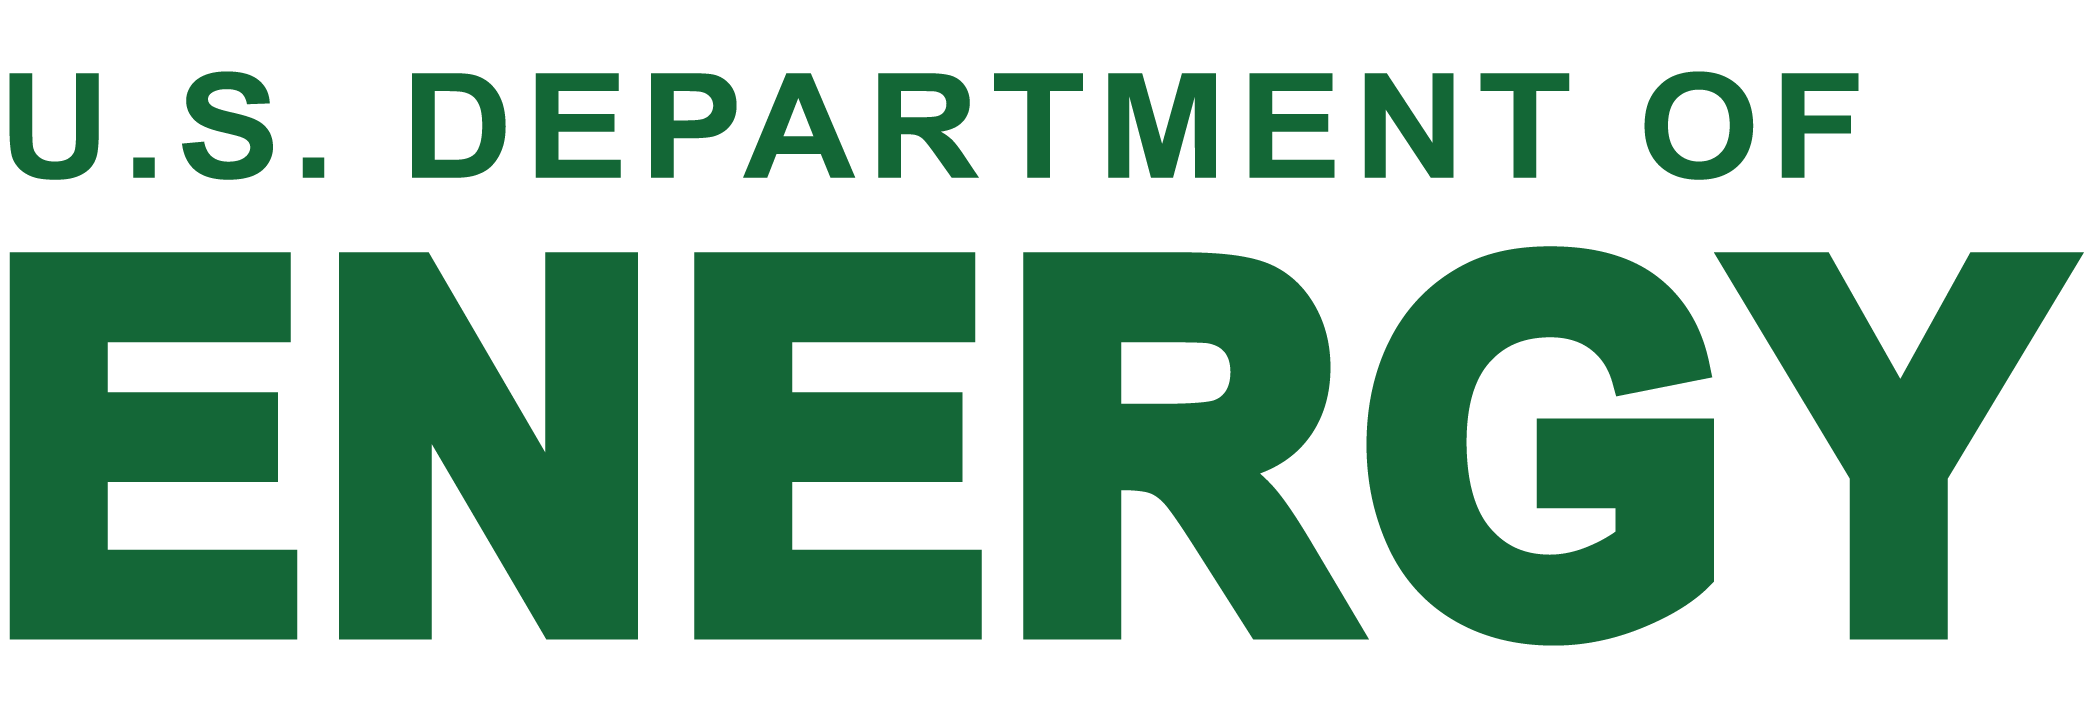 Logo for U.S Department of Energy